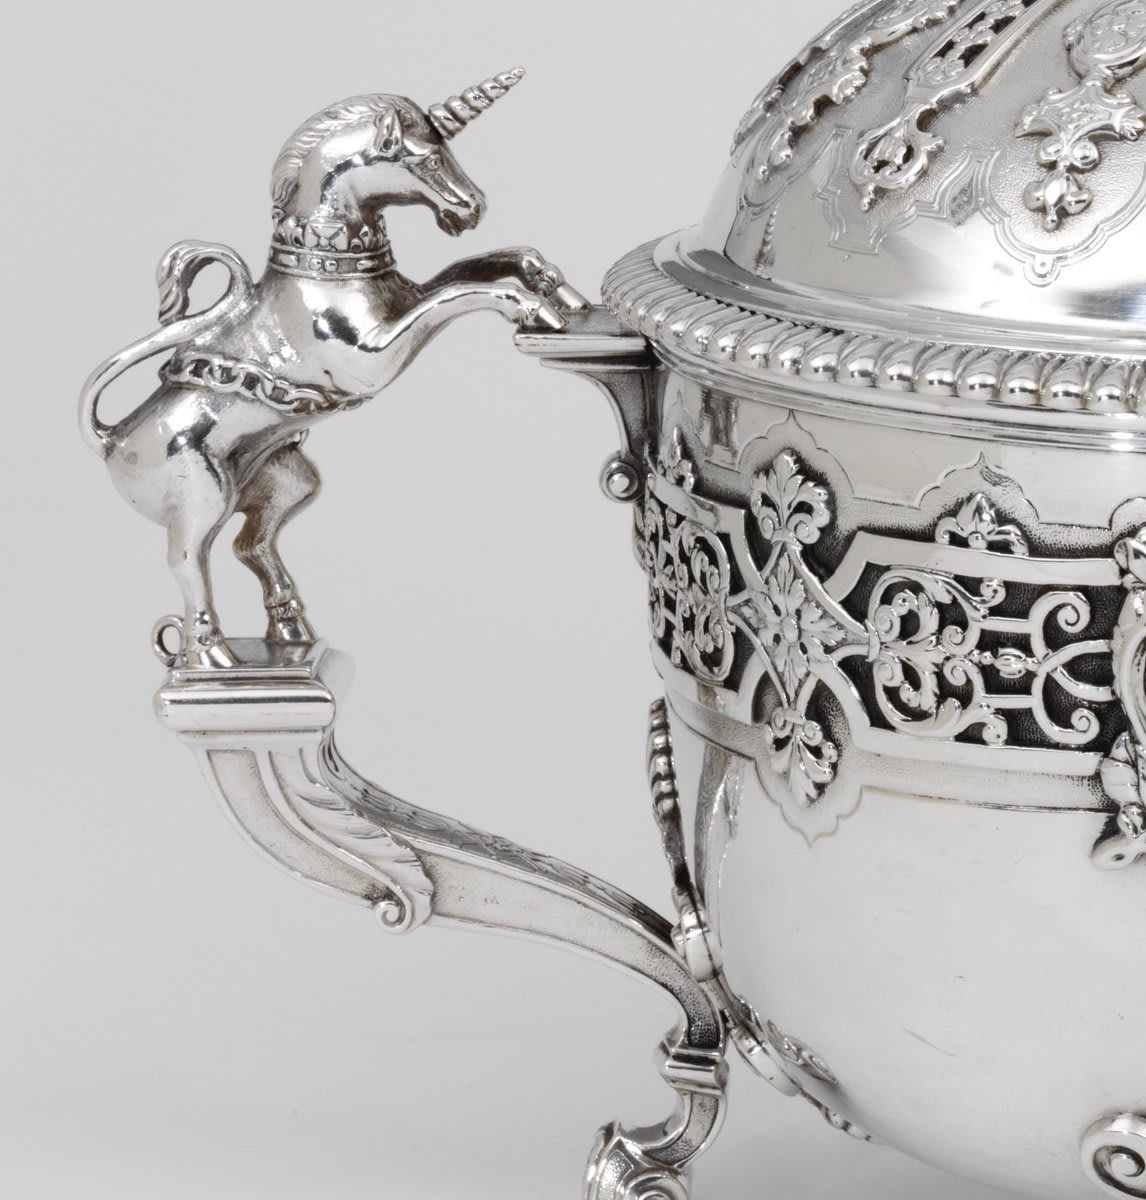 Take a closer look at the silver objects made by the families of refugee craftsmen who fled persecution in France under Louis XIV in the late 17th century. Our short course Huguenot Silver: Turtles, Taste and Tureens starts in May: